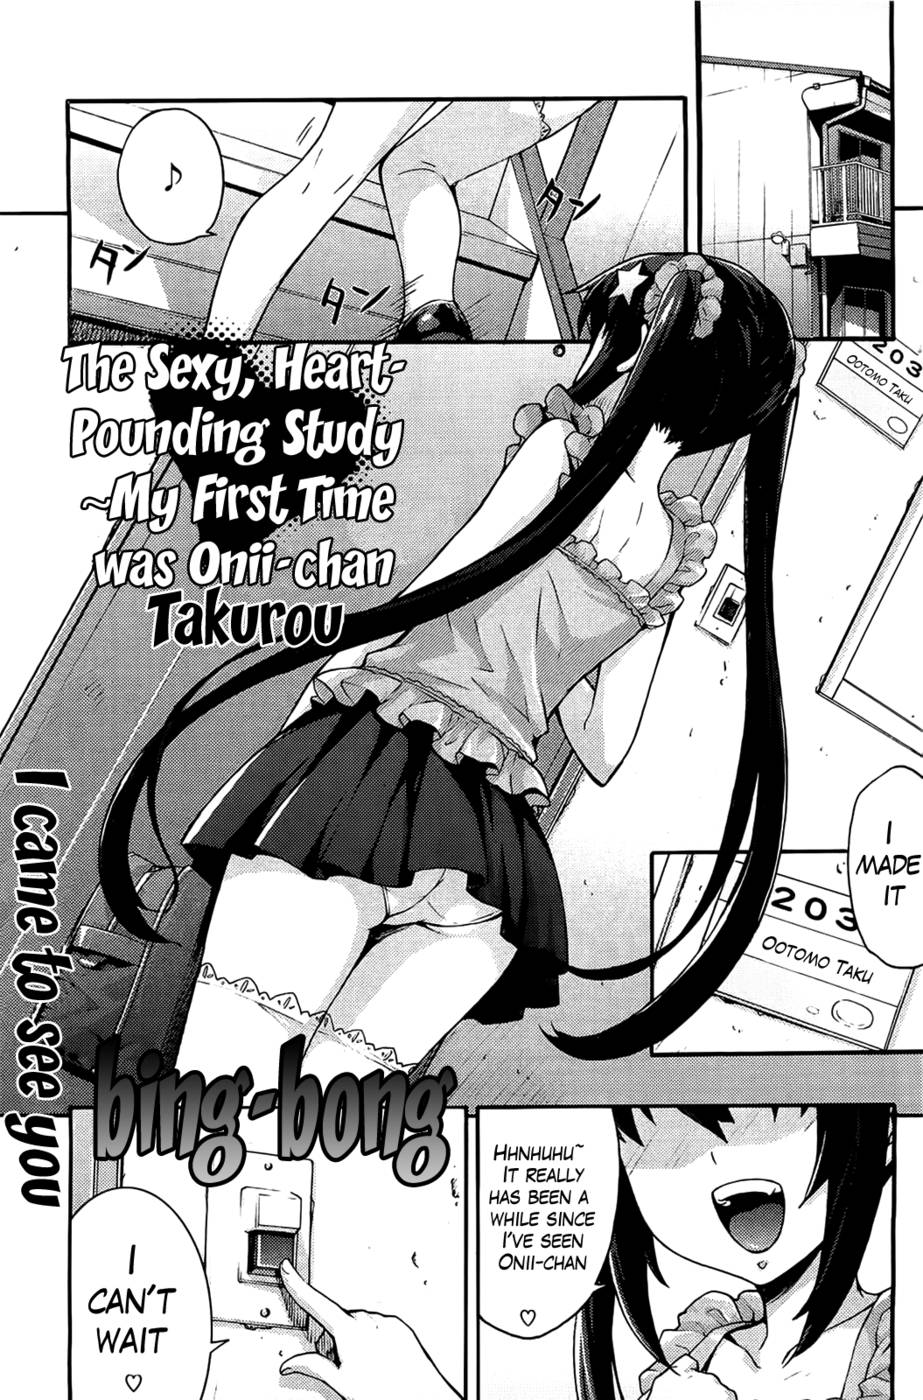 Hentai Manga Comic-The Sexy,Heart-Pounding Study-Chapter 1-My First Time was Onii-chan-1